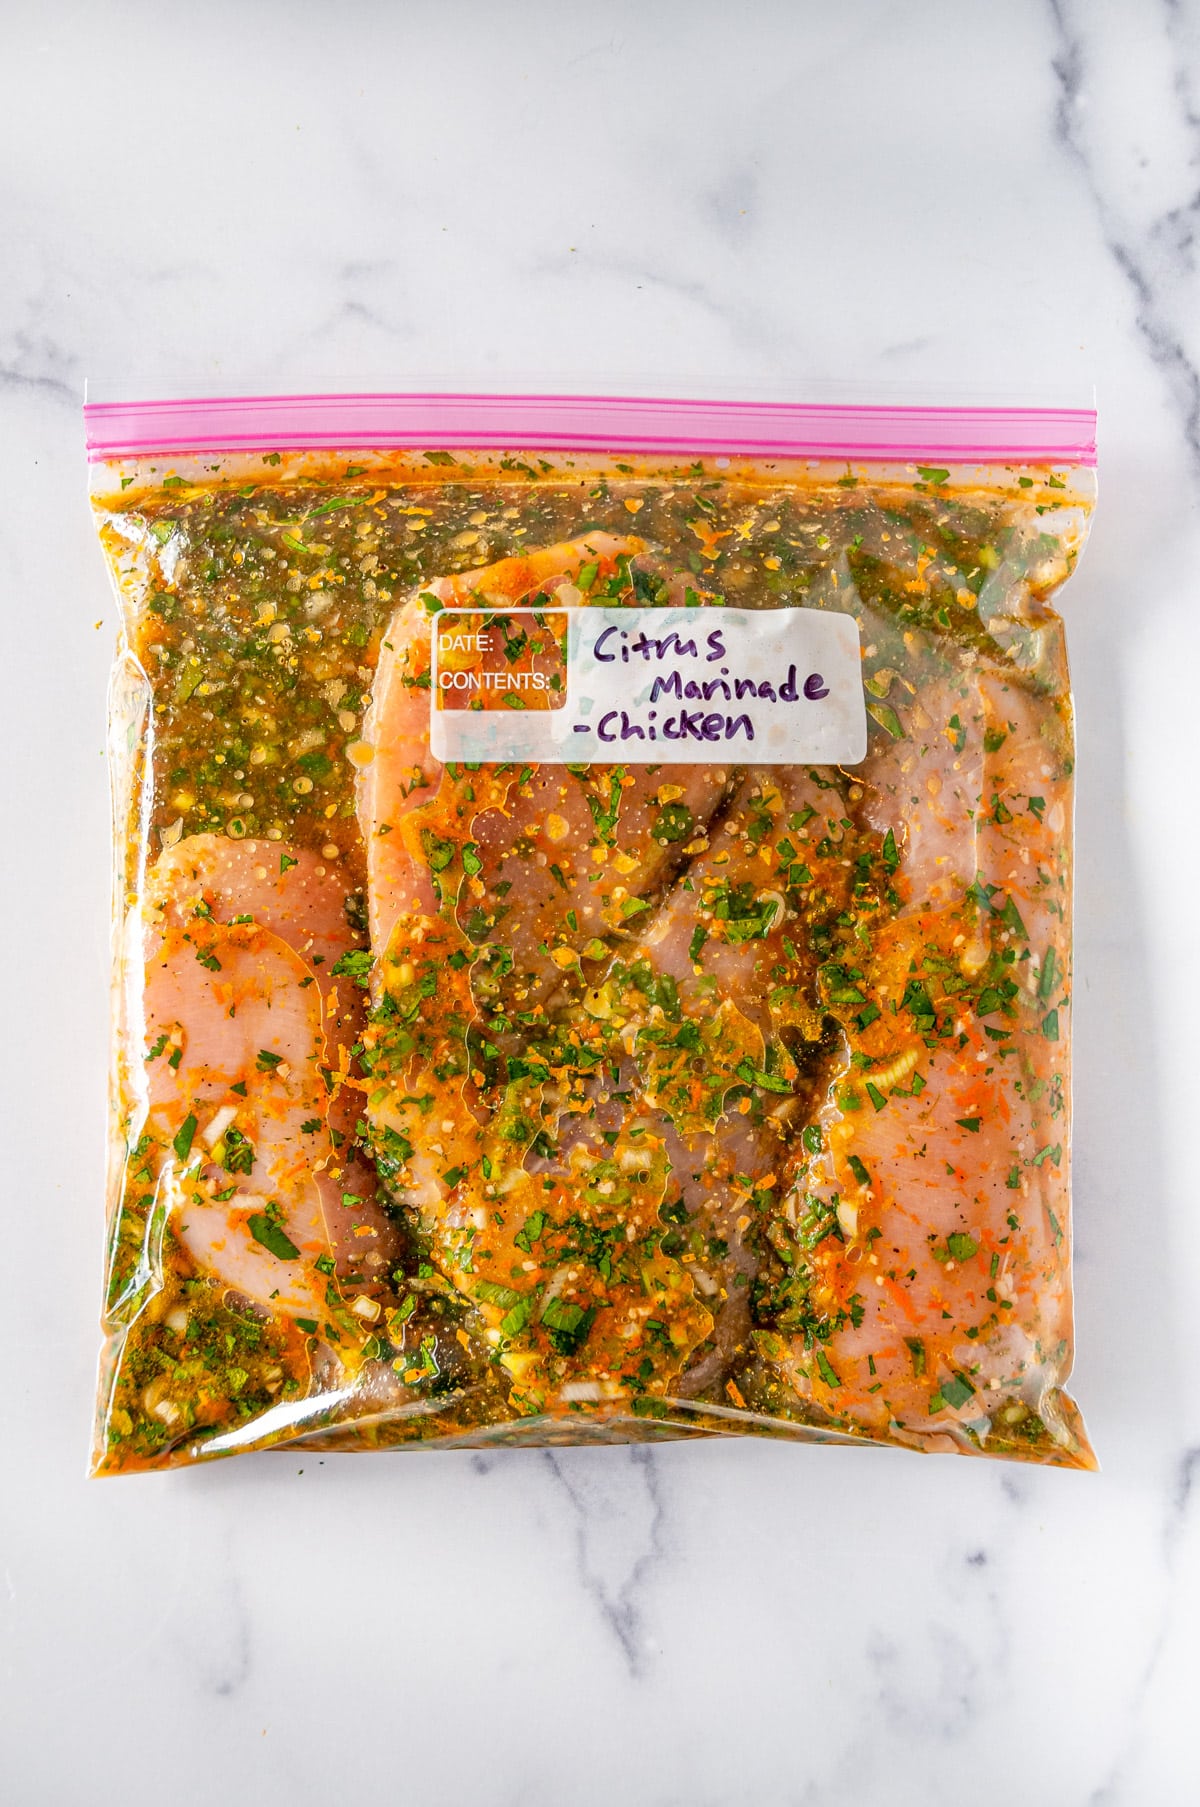 Four raw chicken breasts in a ziploc bag coated in a citrus marinade on white marble